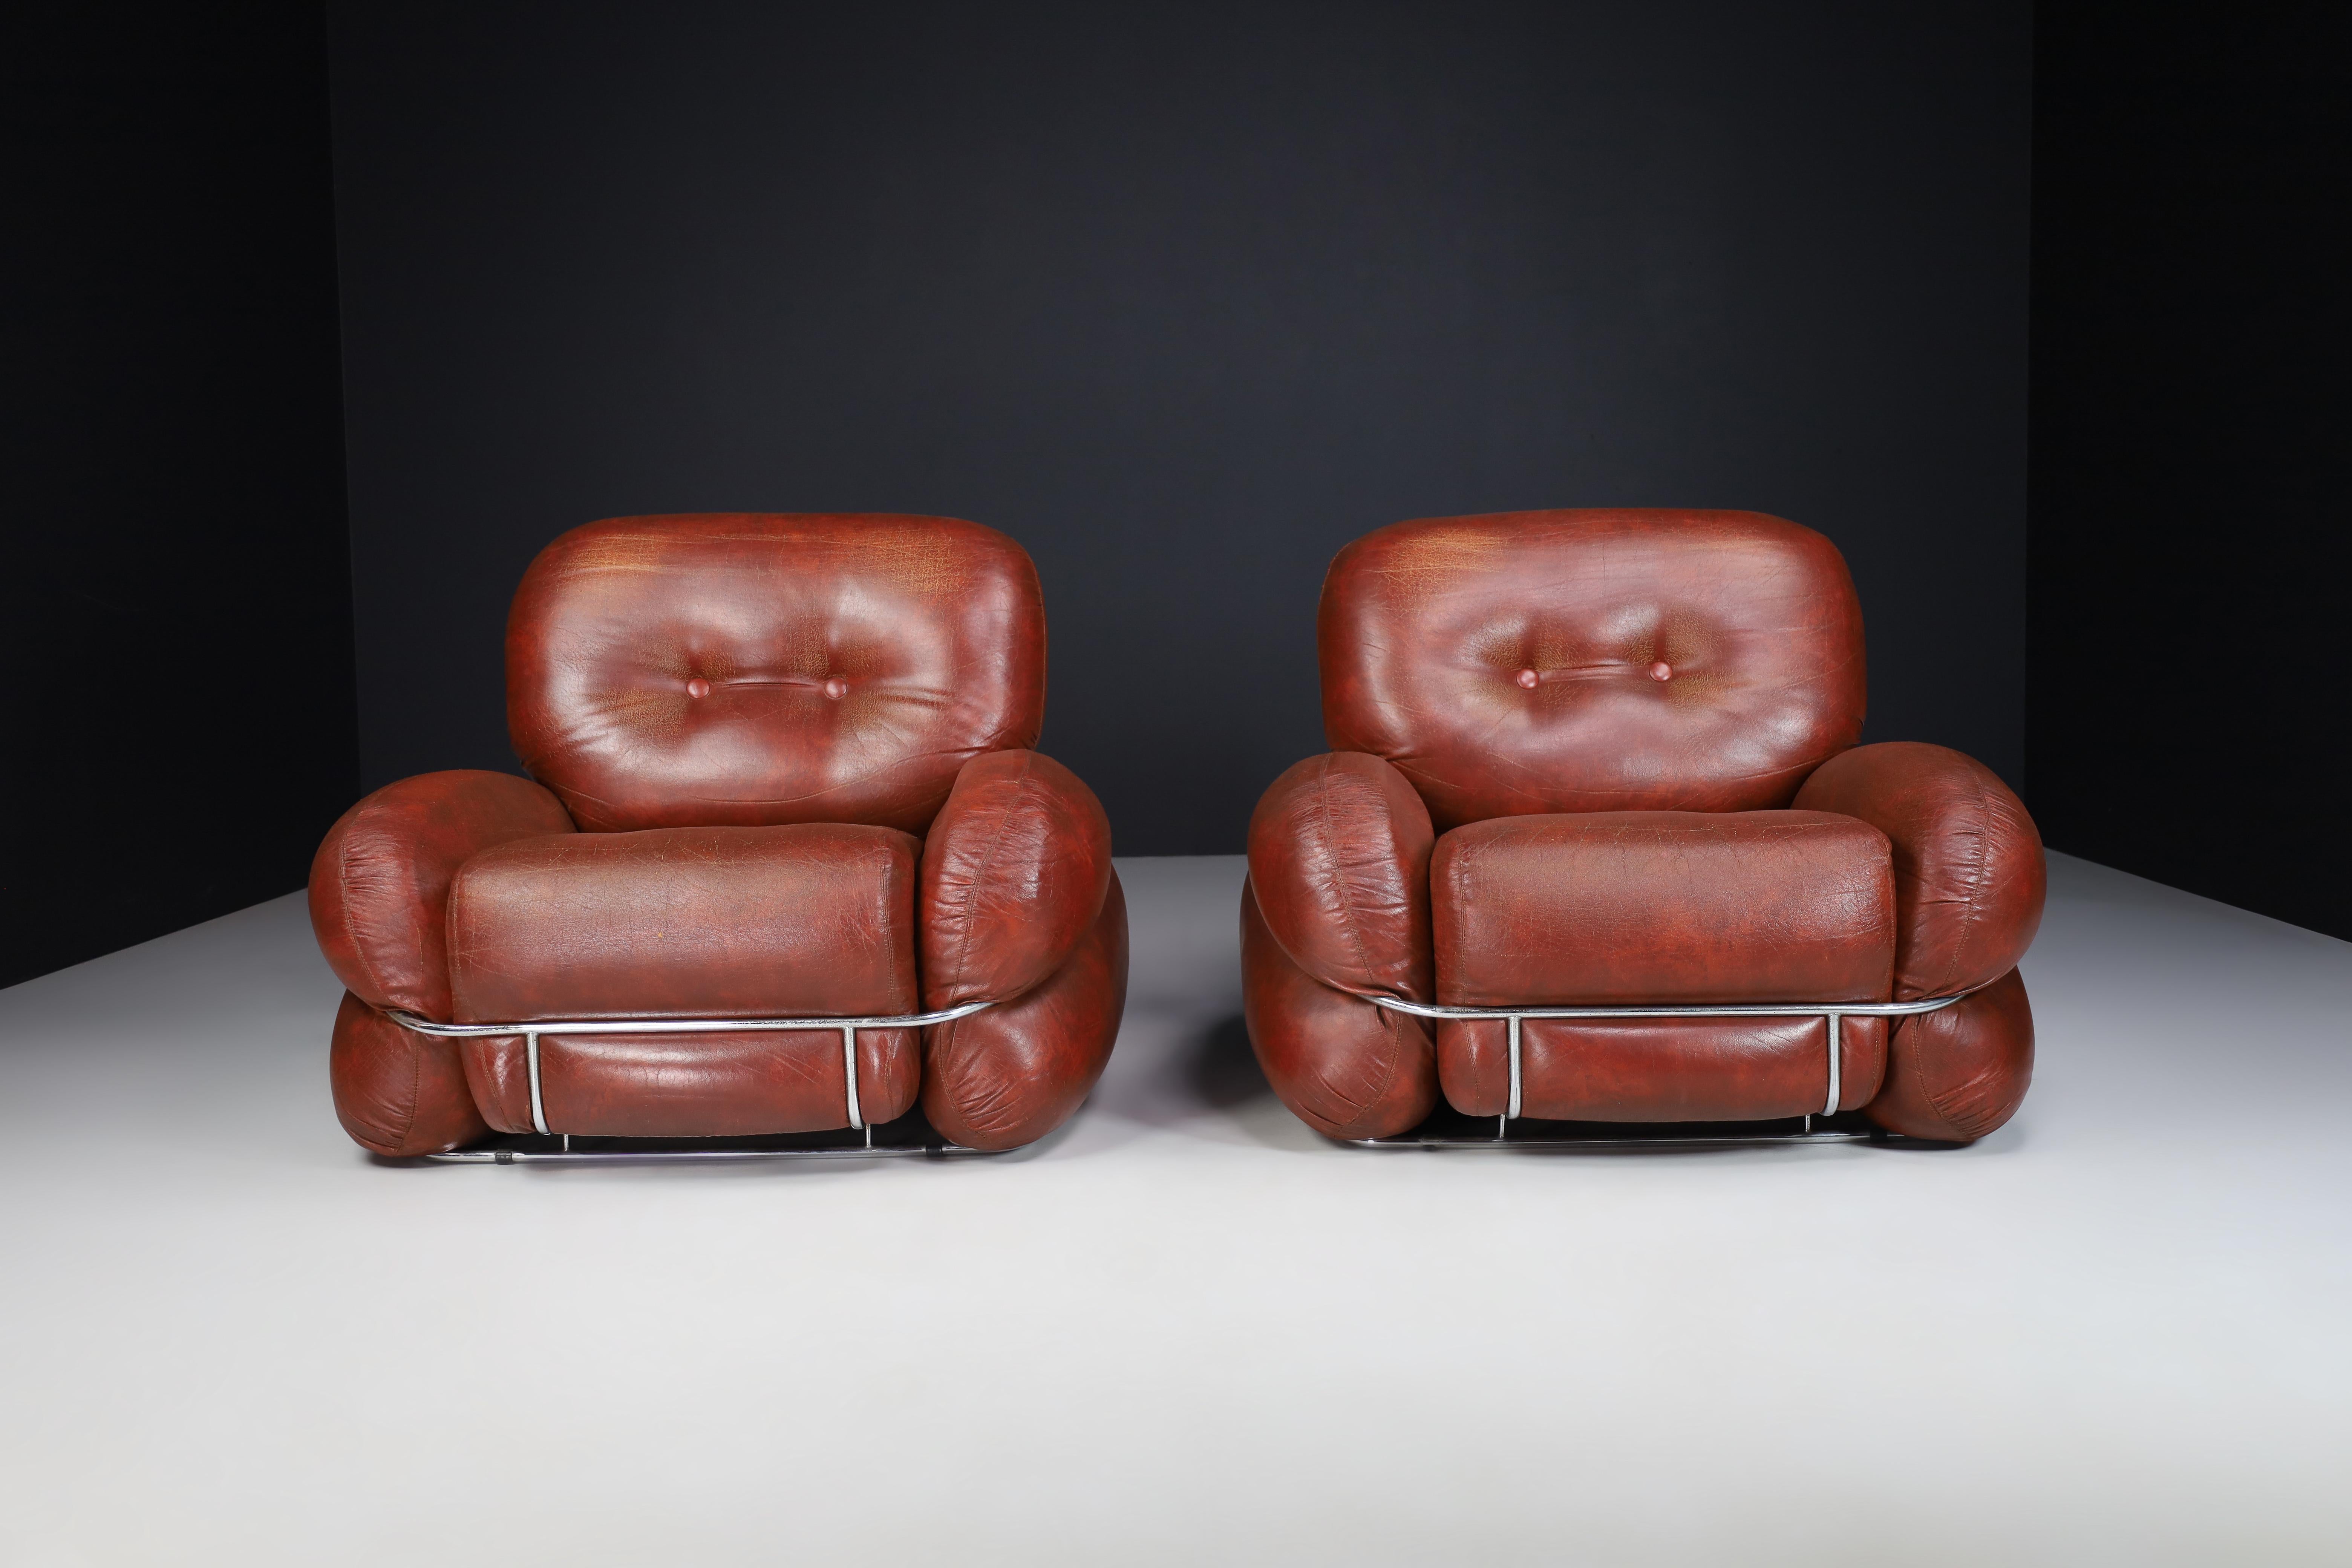 20th Century Mid-Century Modern Leather Lounge / Armchairs by Adriano Piazzesi, Italy 1970s For Sale